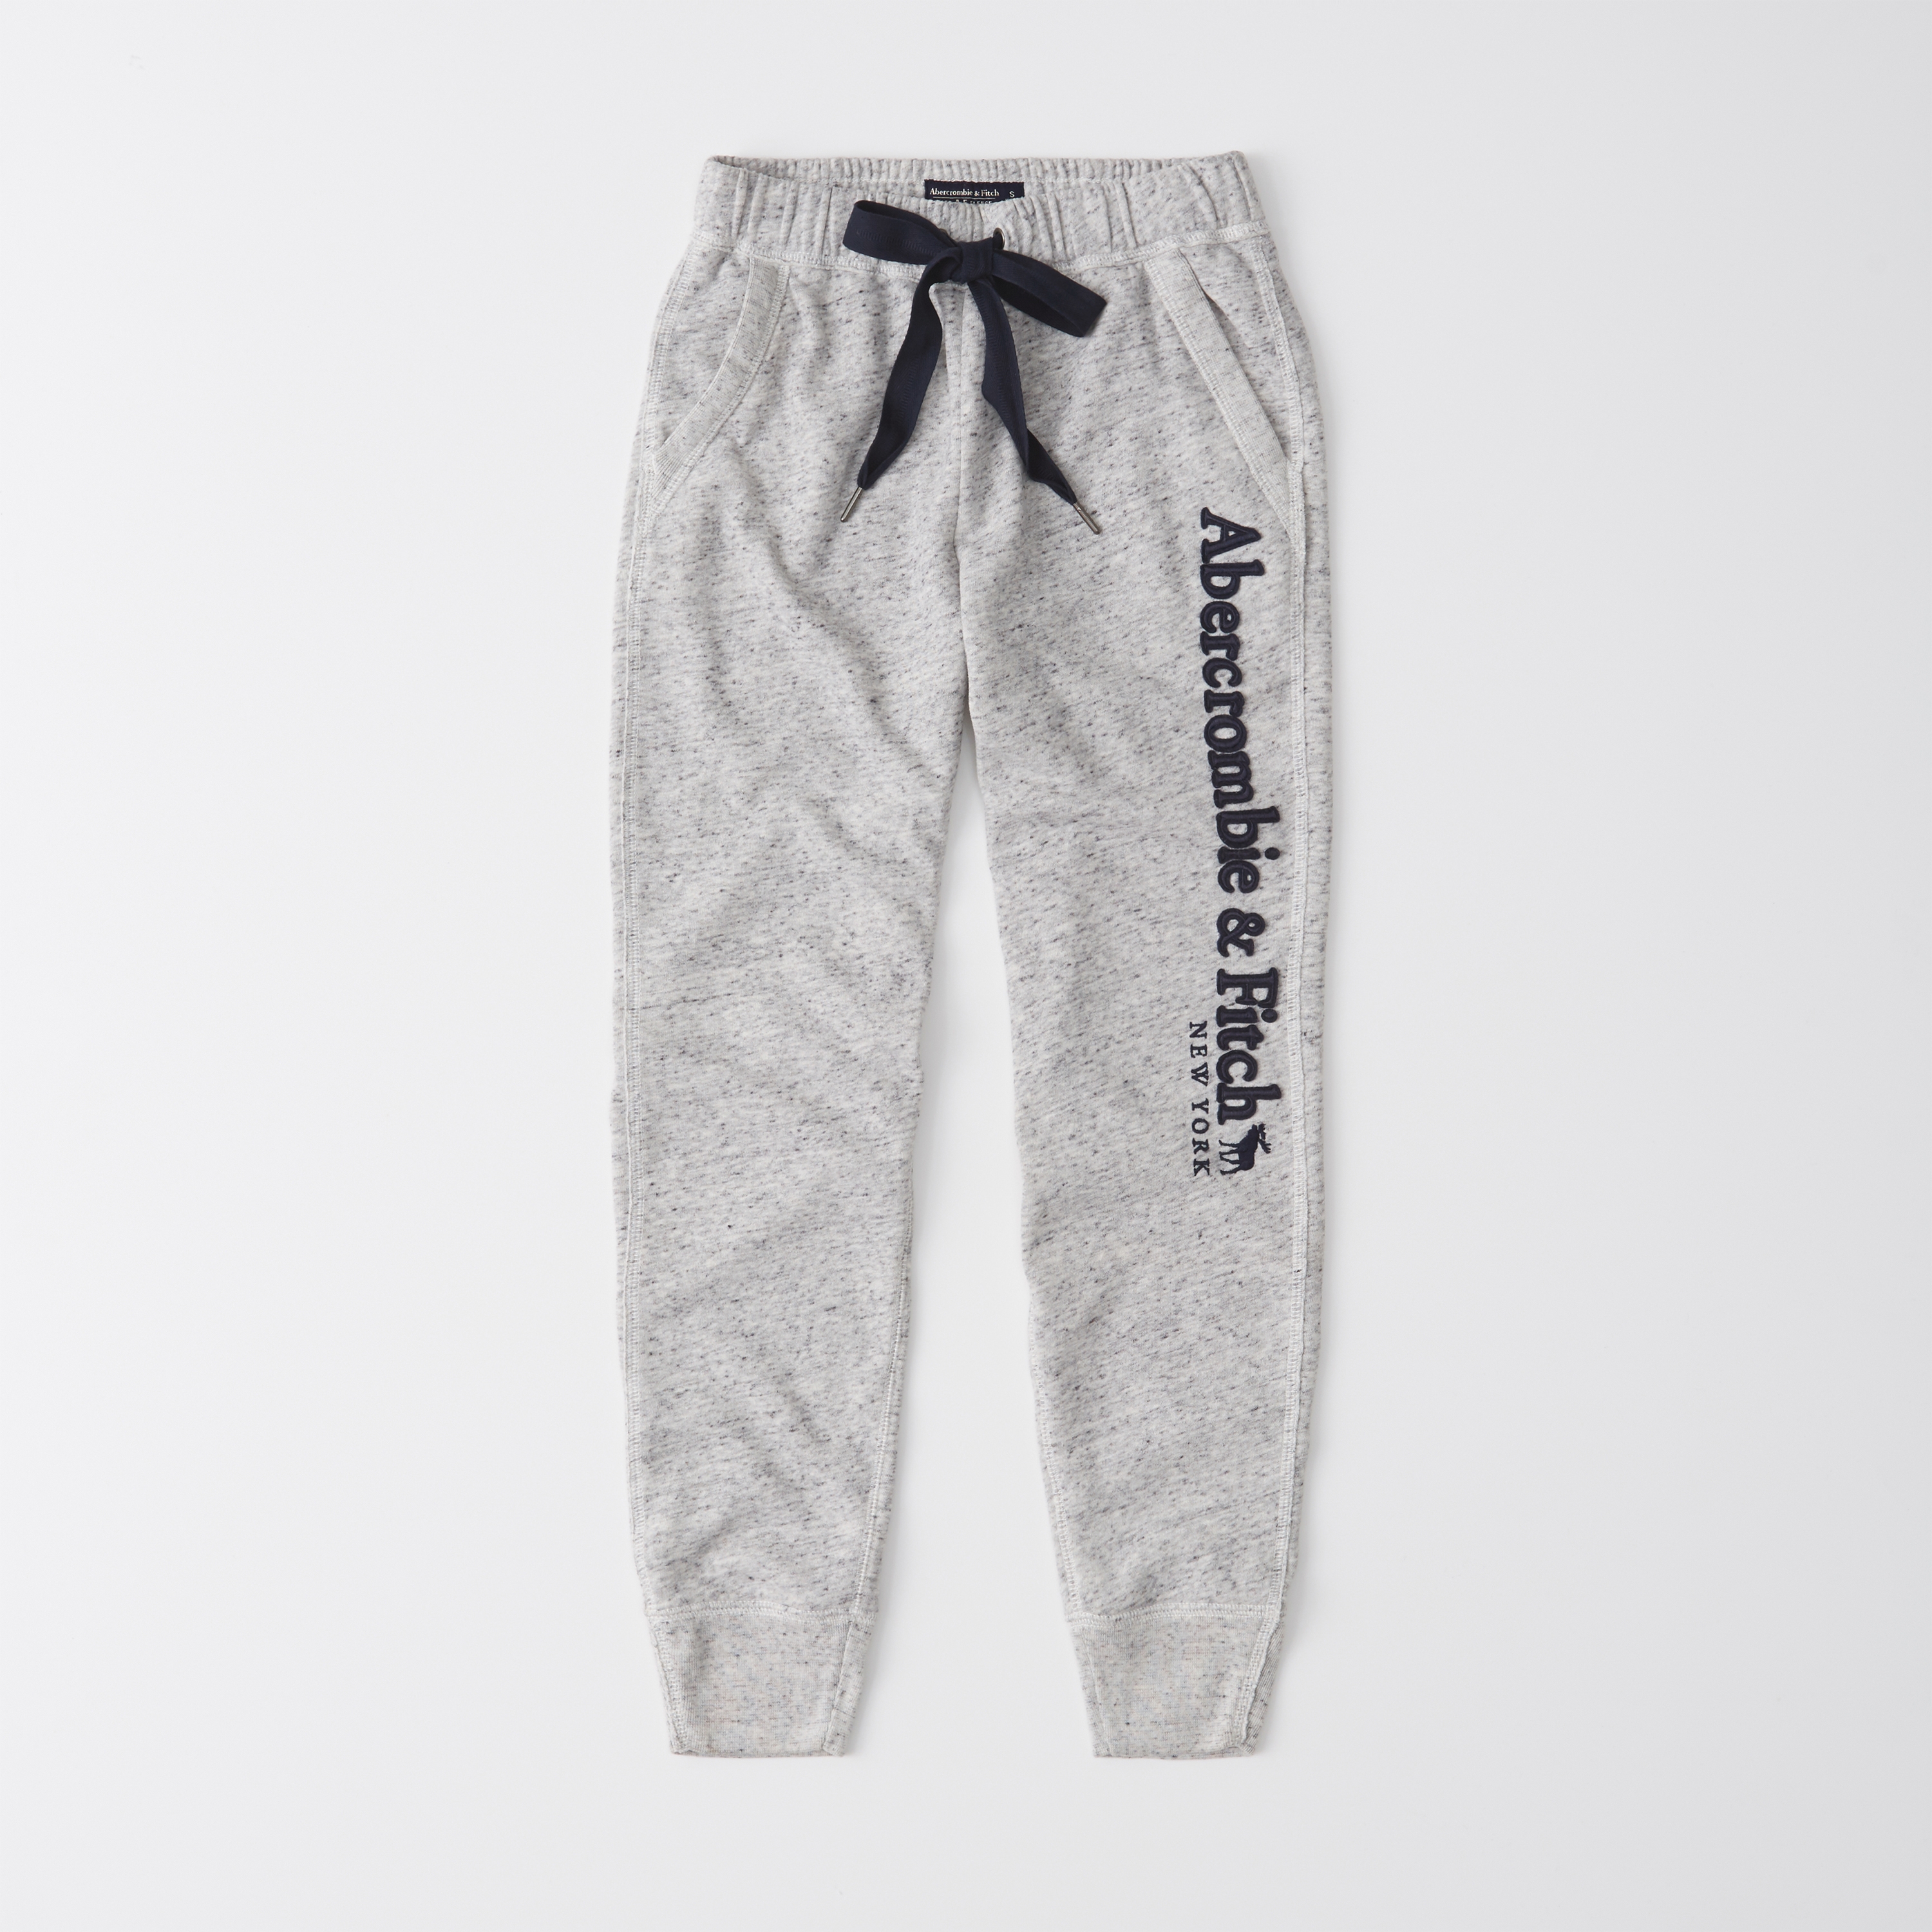 abercrombie and fitch jogging pants